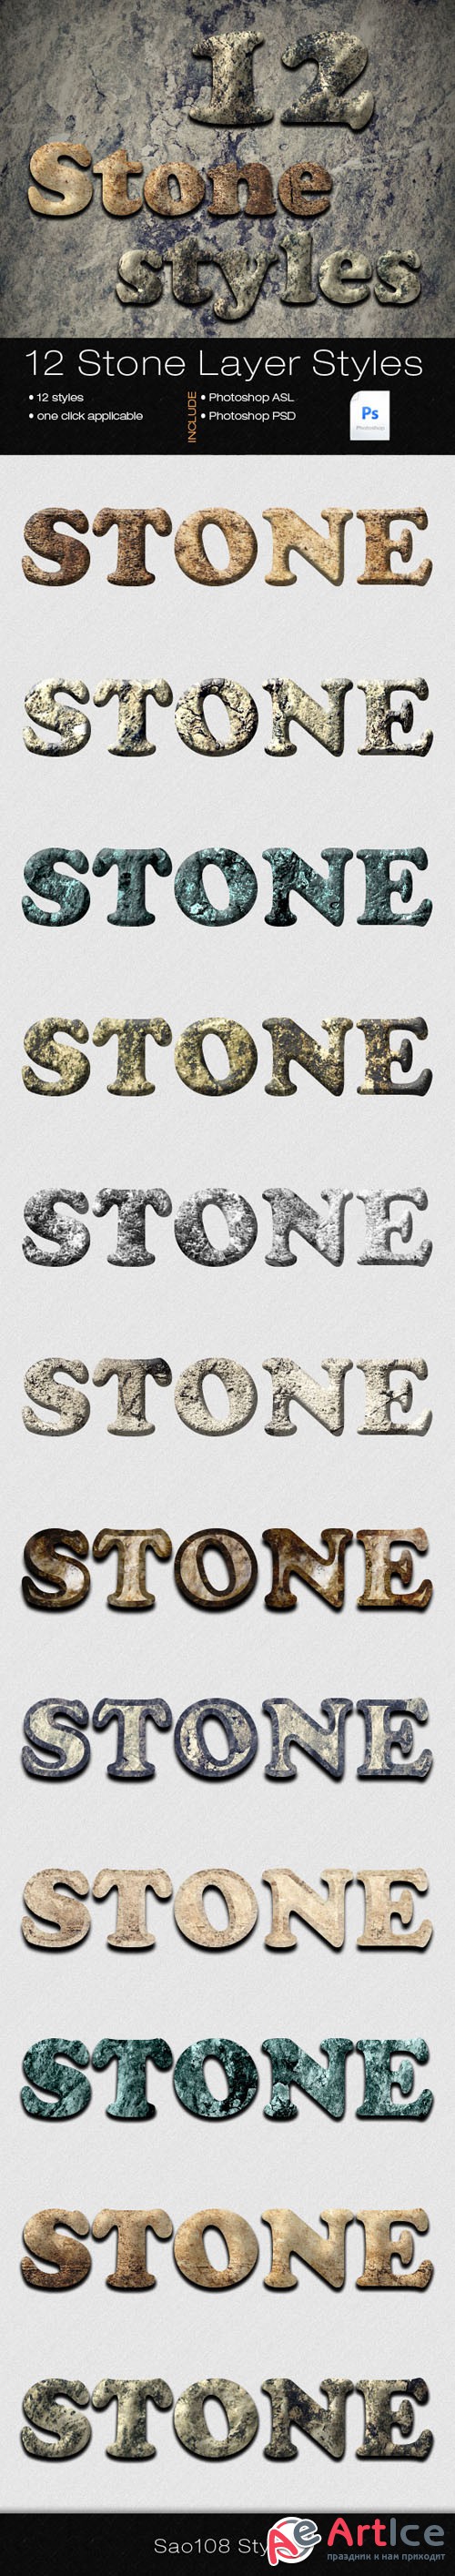 12 Stone Text Effect Photoshop Layer Styles